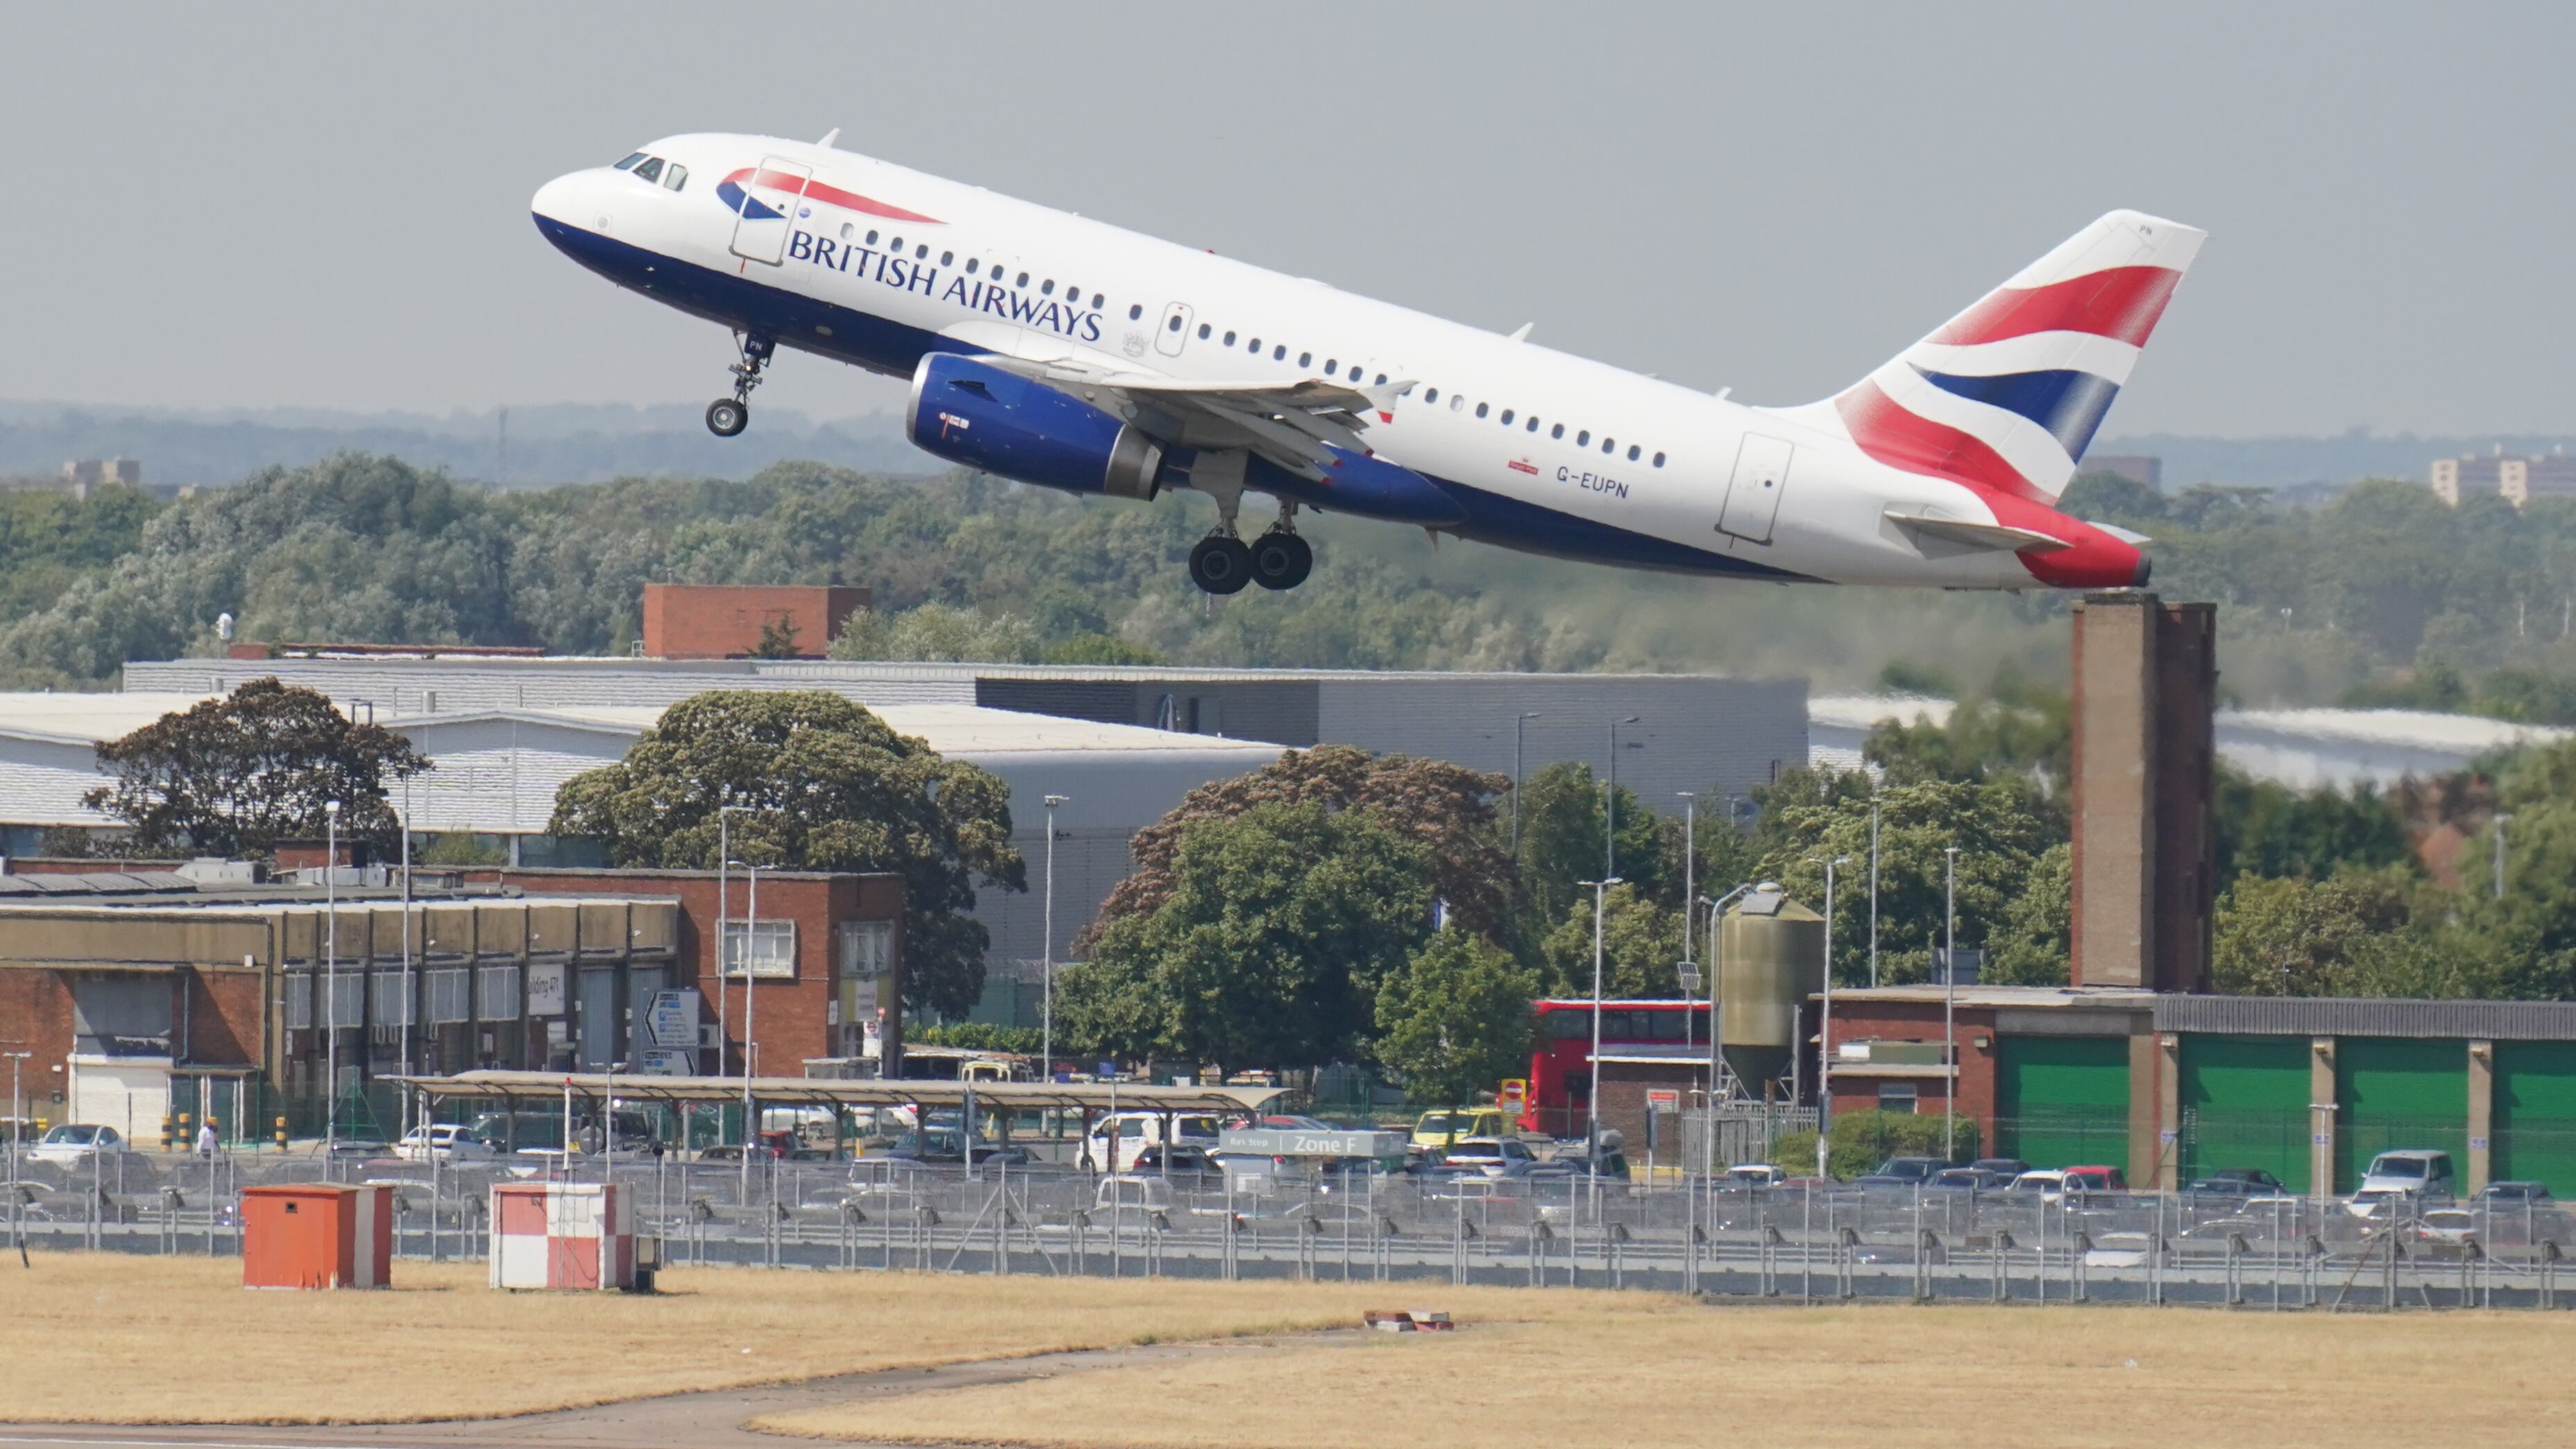 The owner of British Airways has said its earnings have soared in recent months